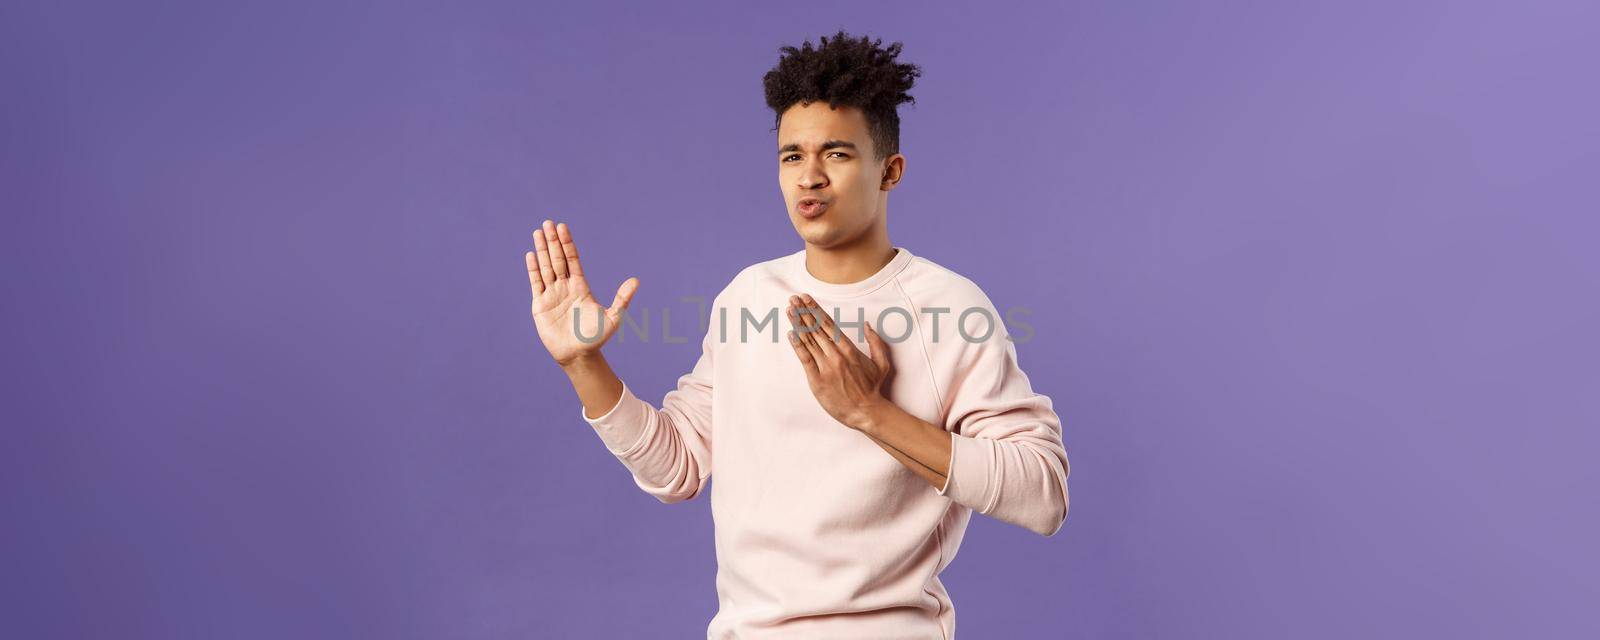 Portrait of funny and carefree young hispanic guy holding hands in martial arts attack pose, folding lips acting sassy and cool as imitating ninja, ready to defeat coronavirus, purple background.